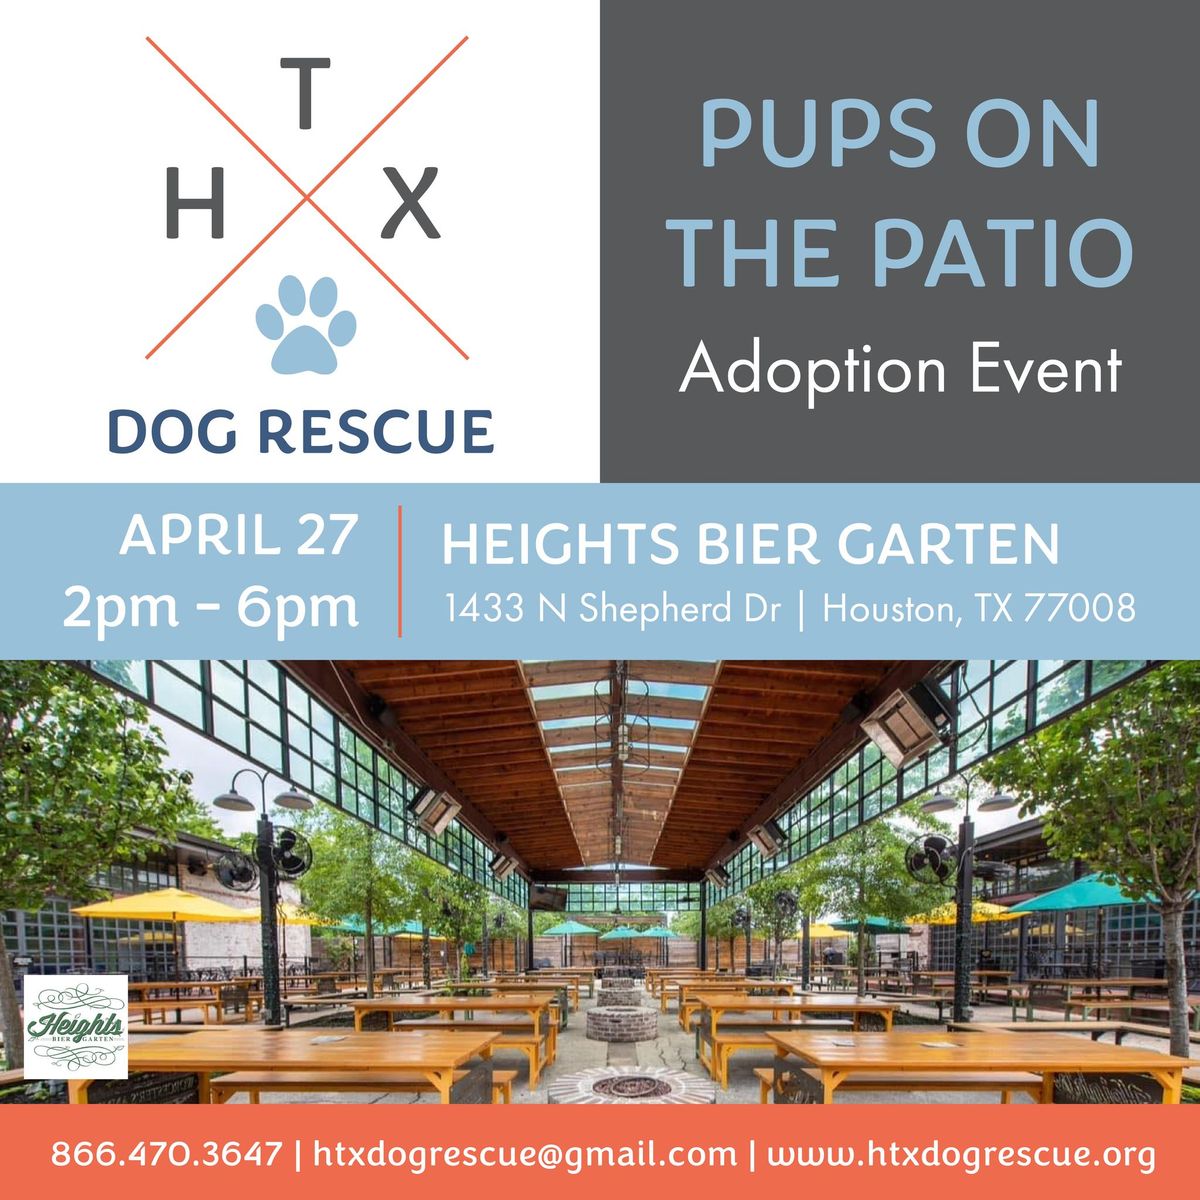 Pups on the Patio Adoption Event